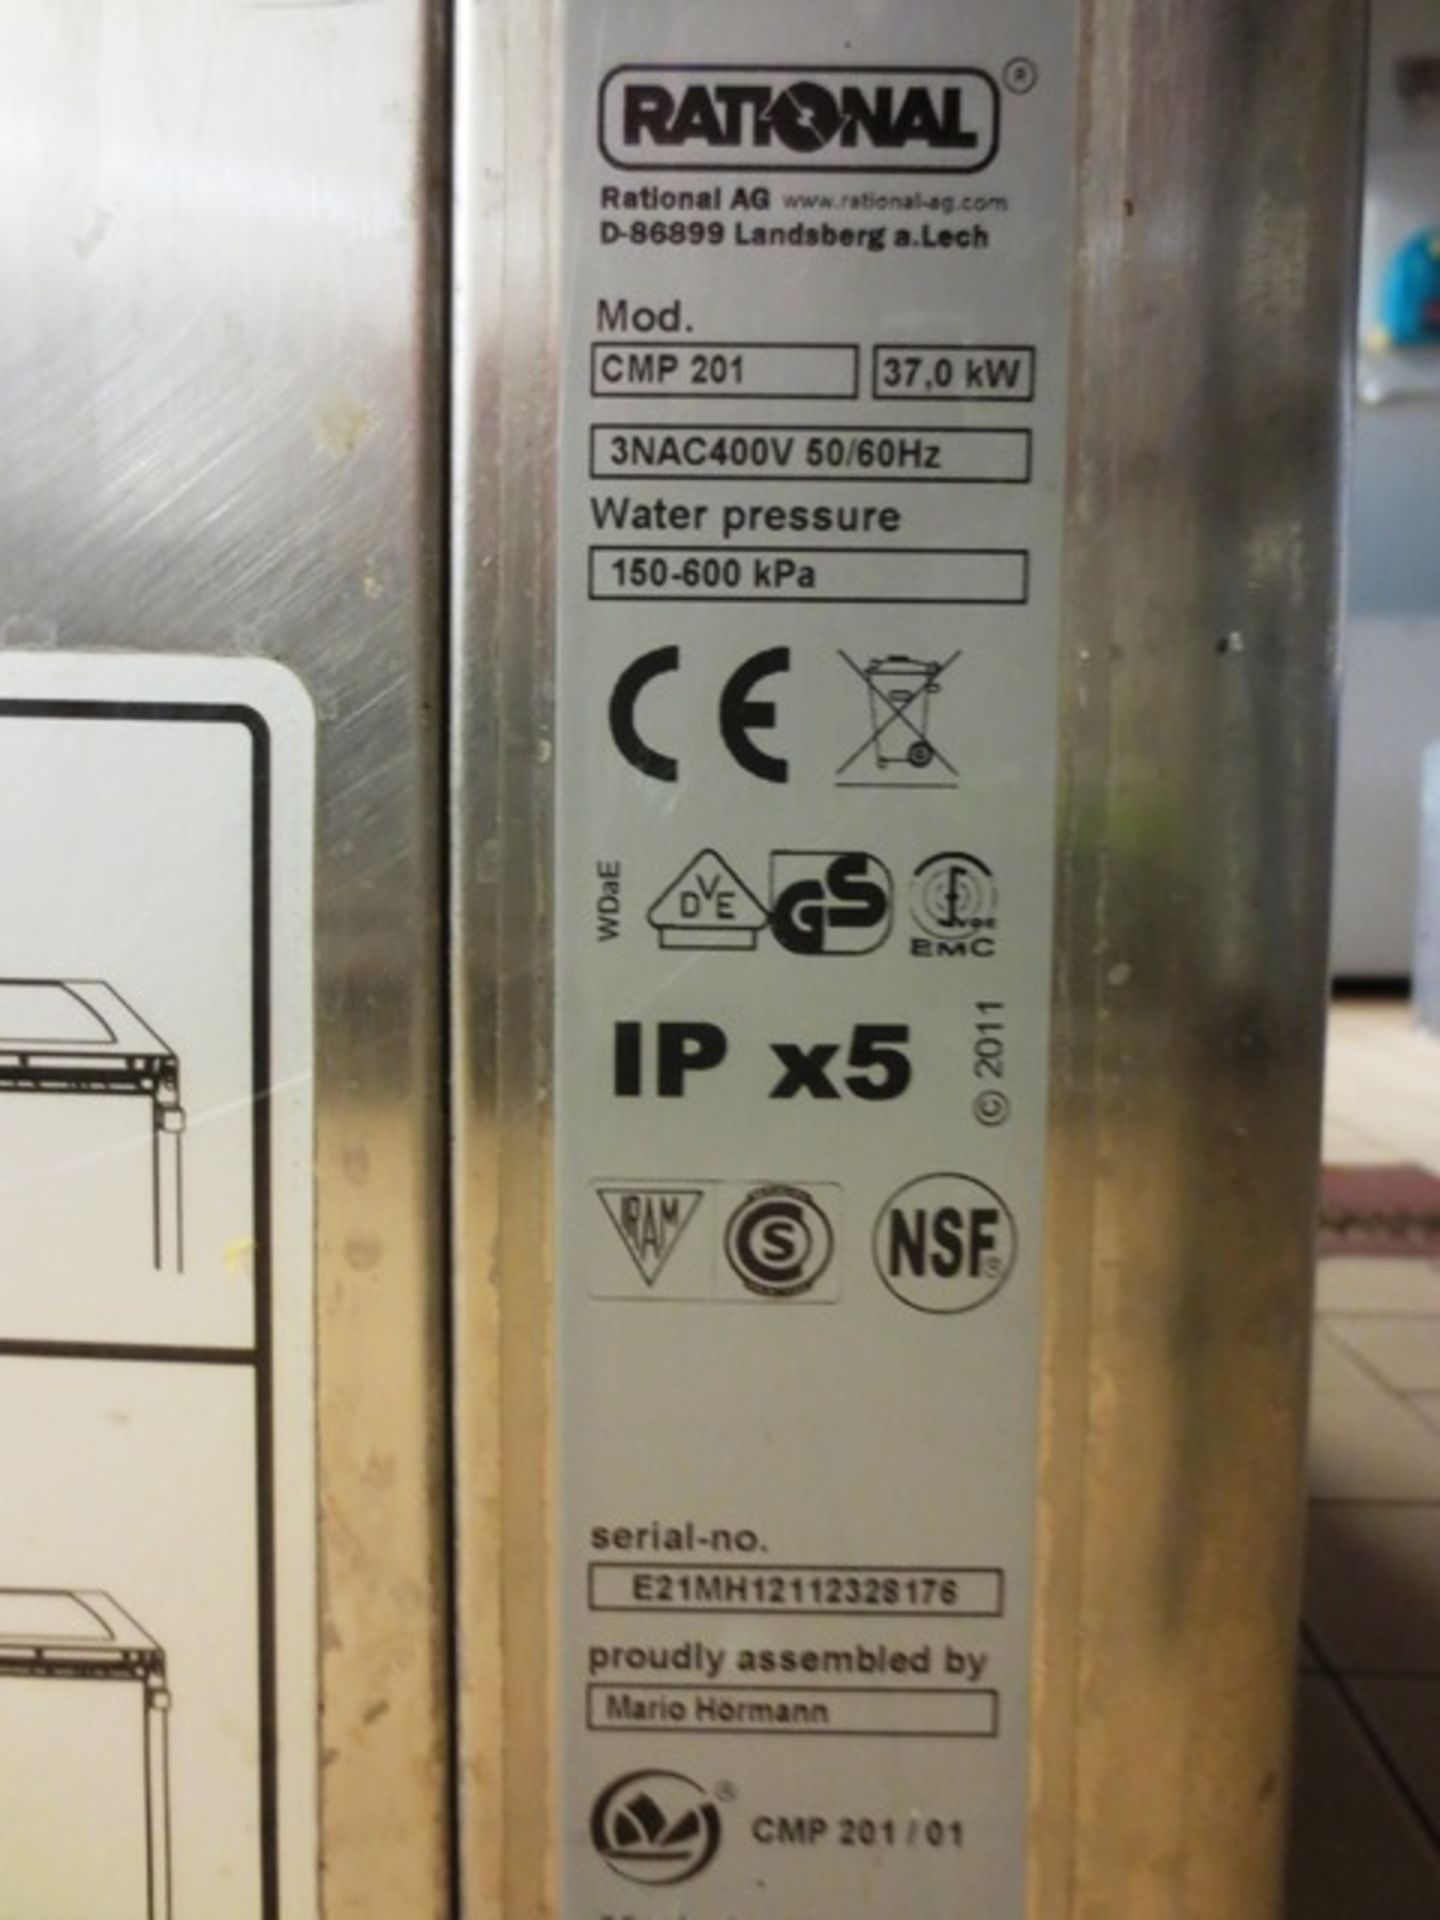 Rational Combi Master Plus, stainless steel combi oven, model: CMP201, serial no: - Image 3 of 4